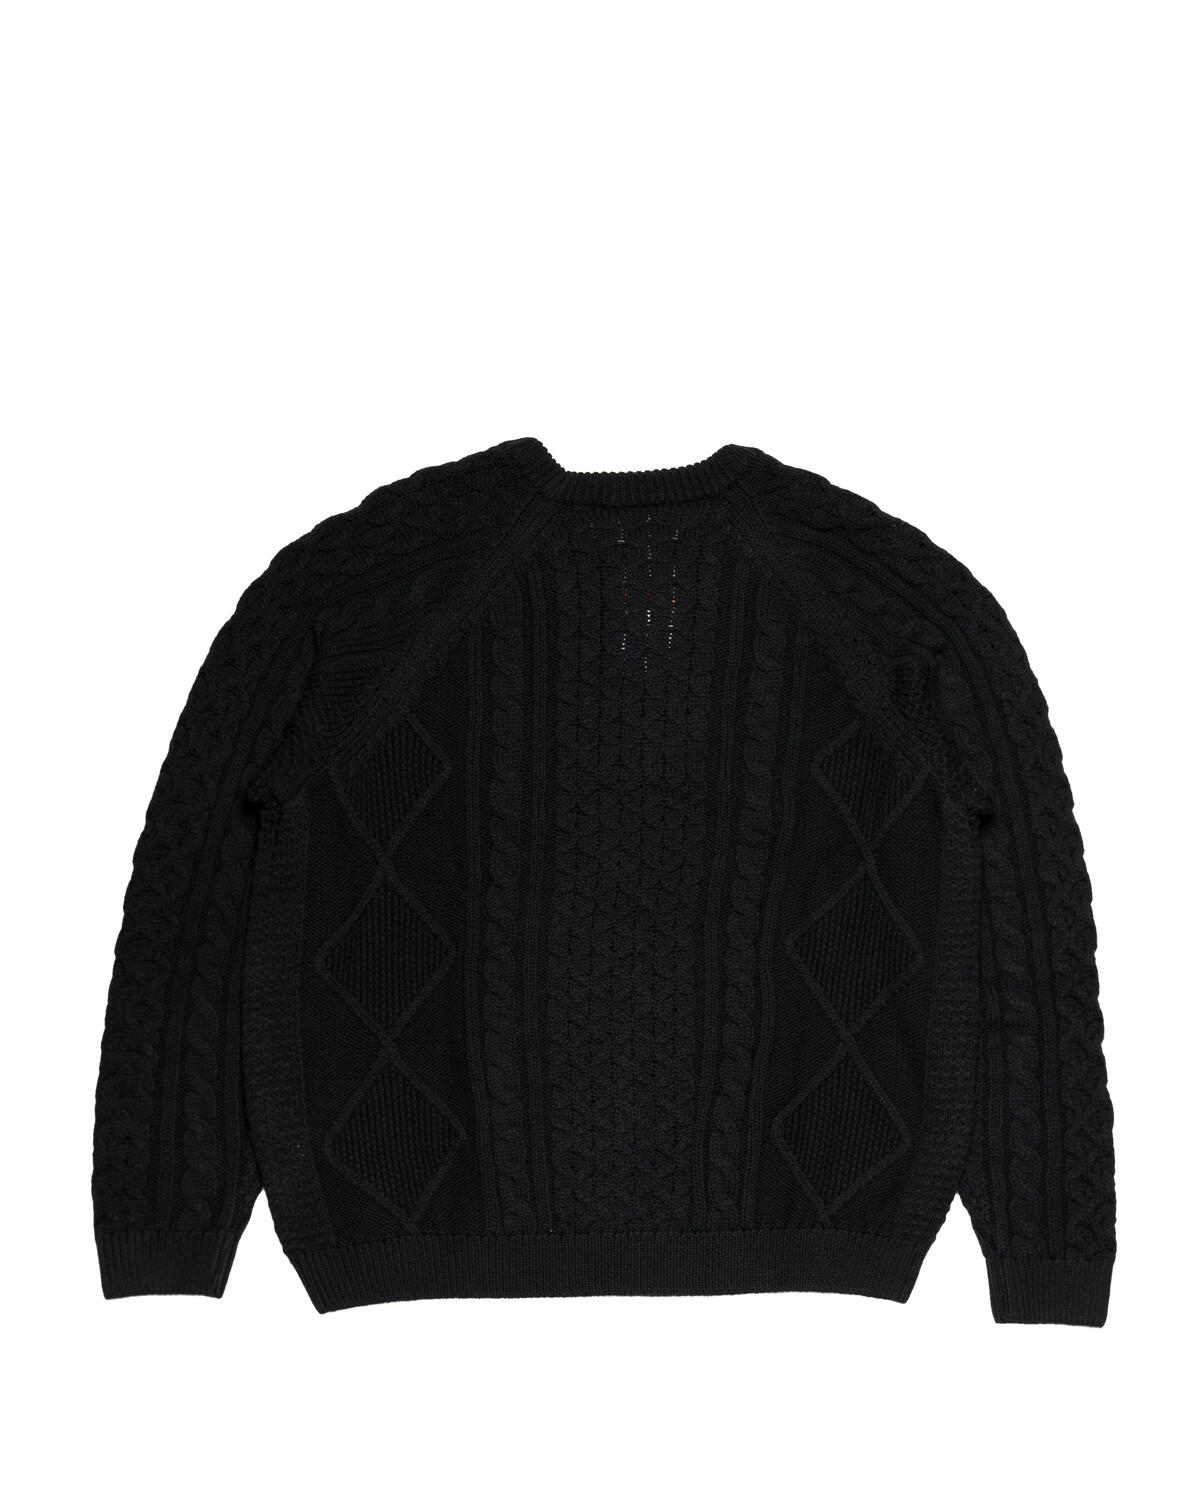 Nike CABLE KNIT SWEATER